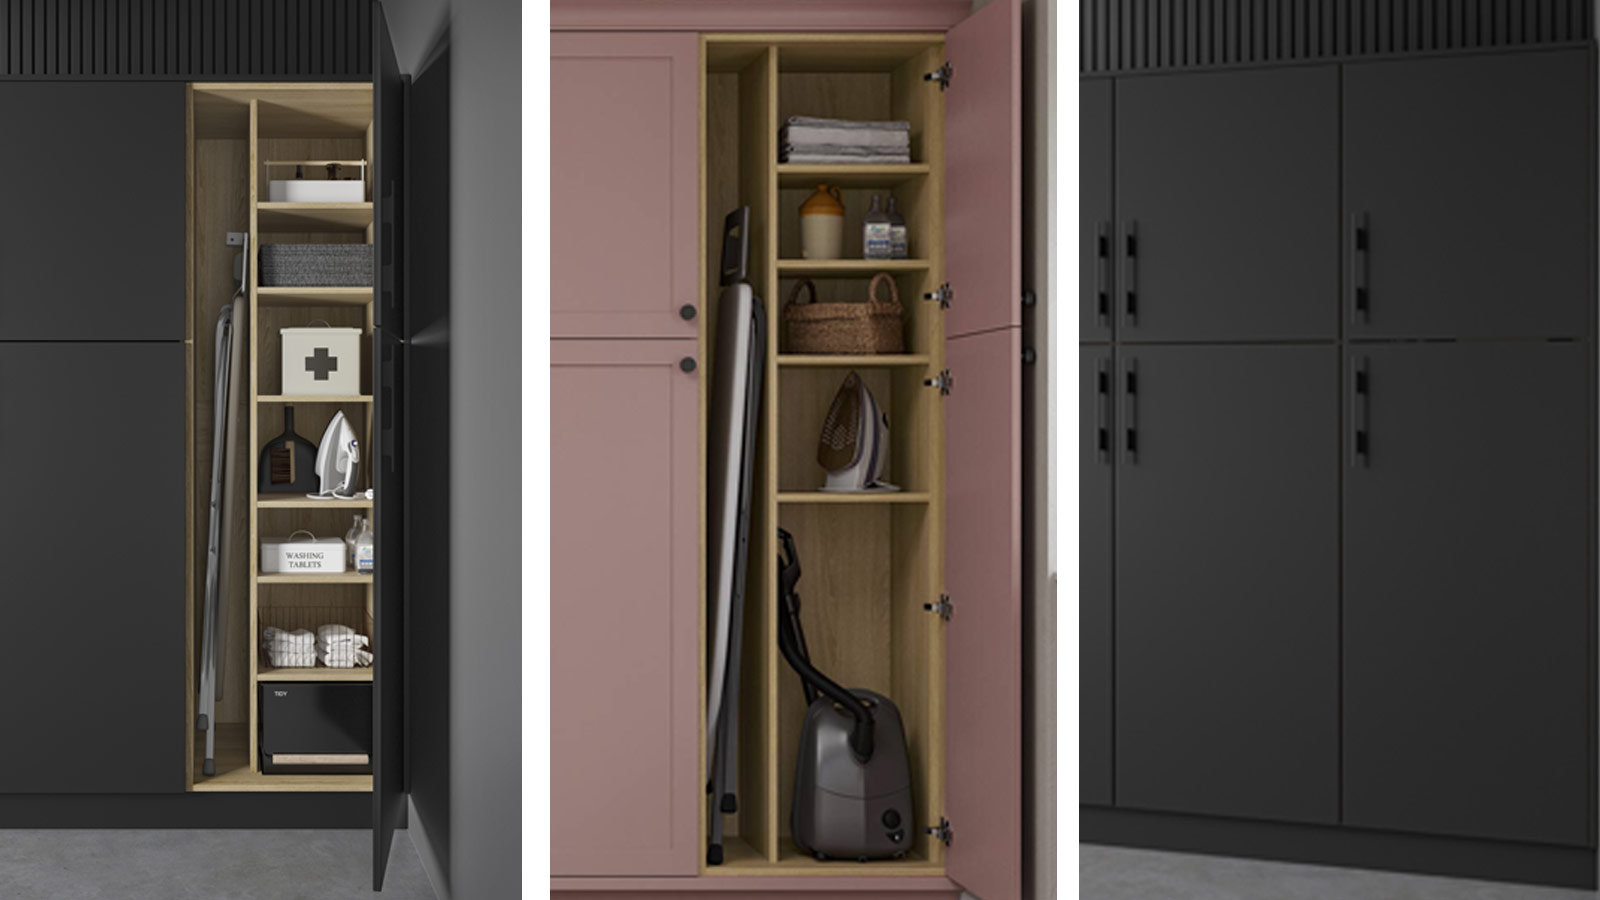 Laundry room storage in the form of a utility room cupboard divider